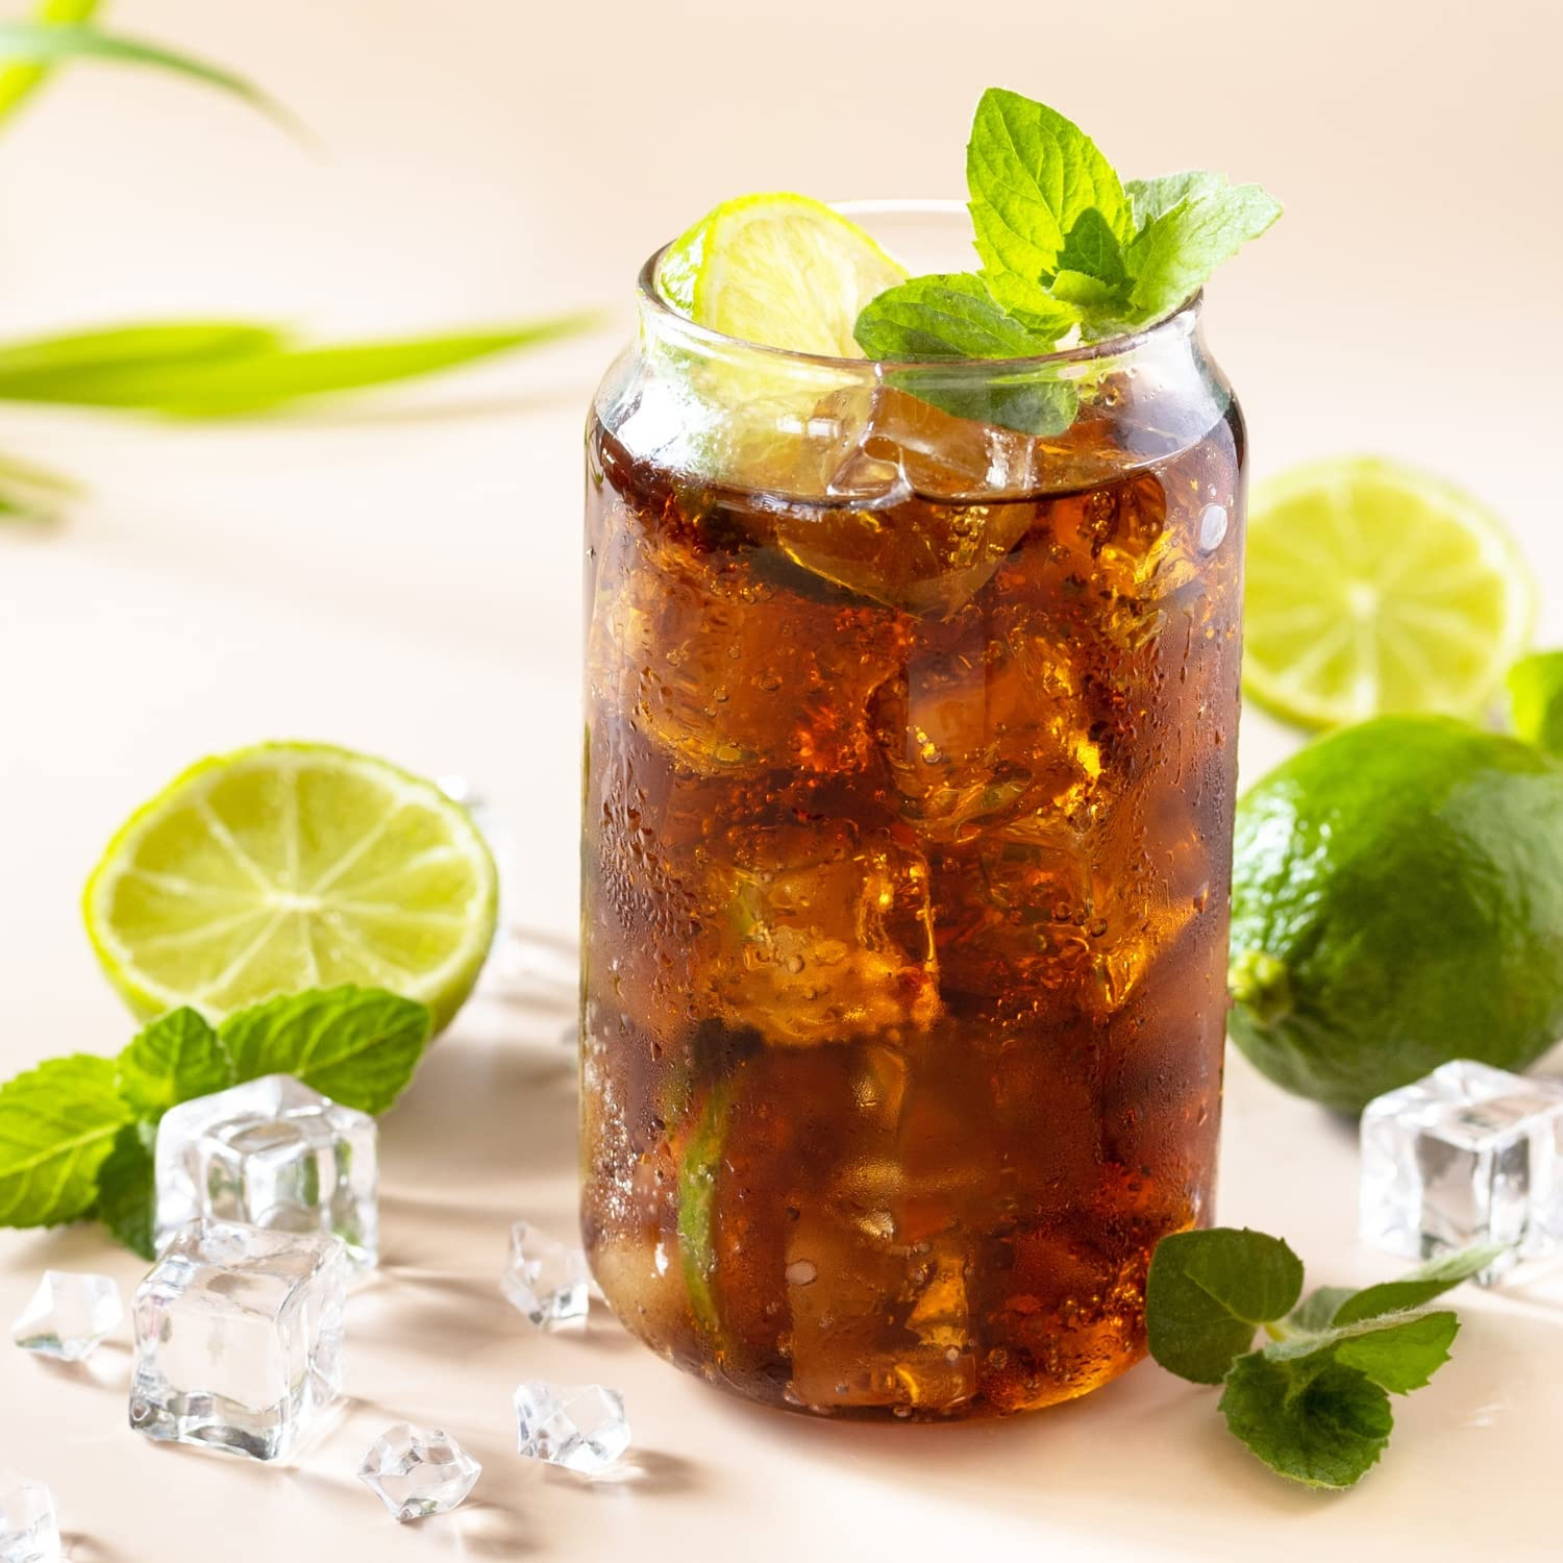 Glass of cold Soda with Mint leaf